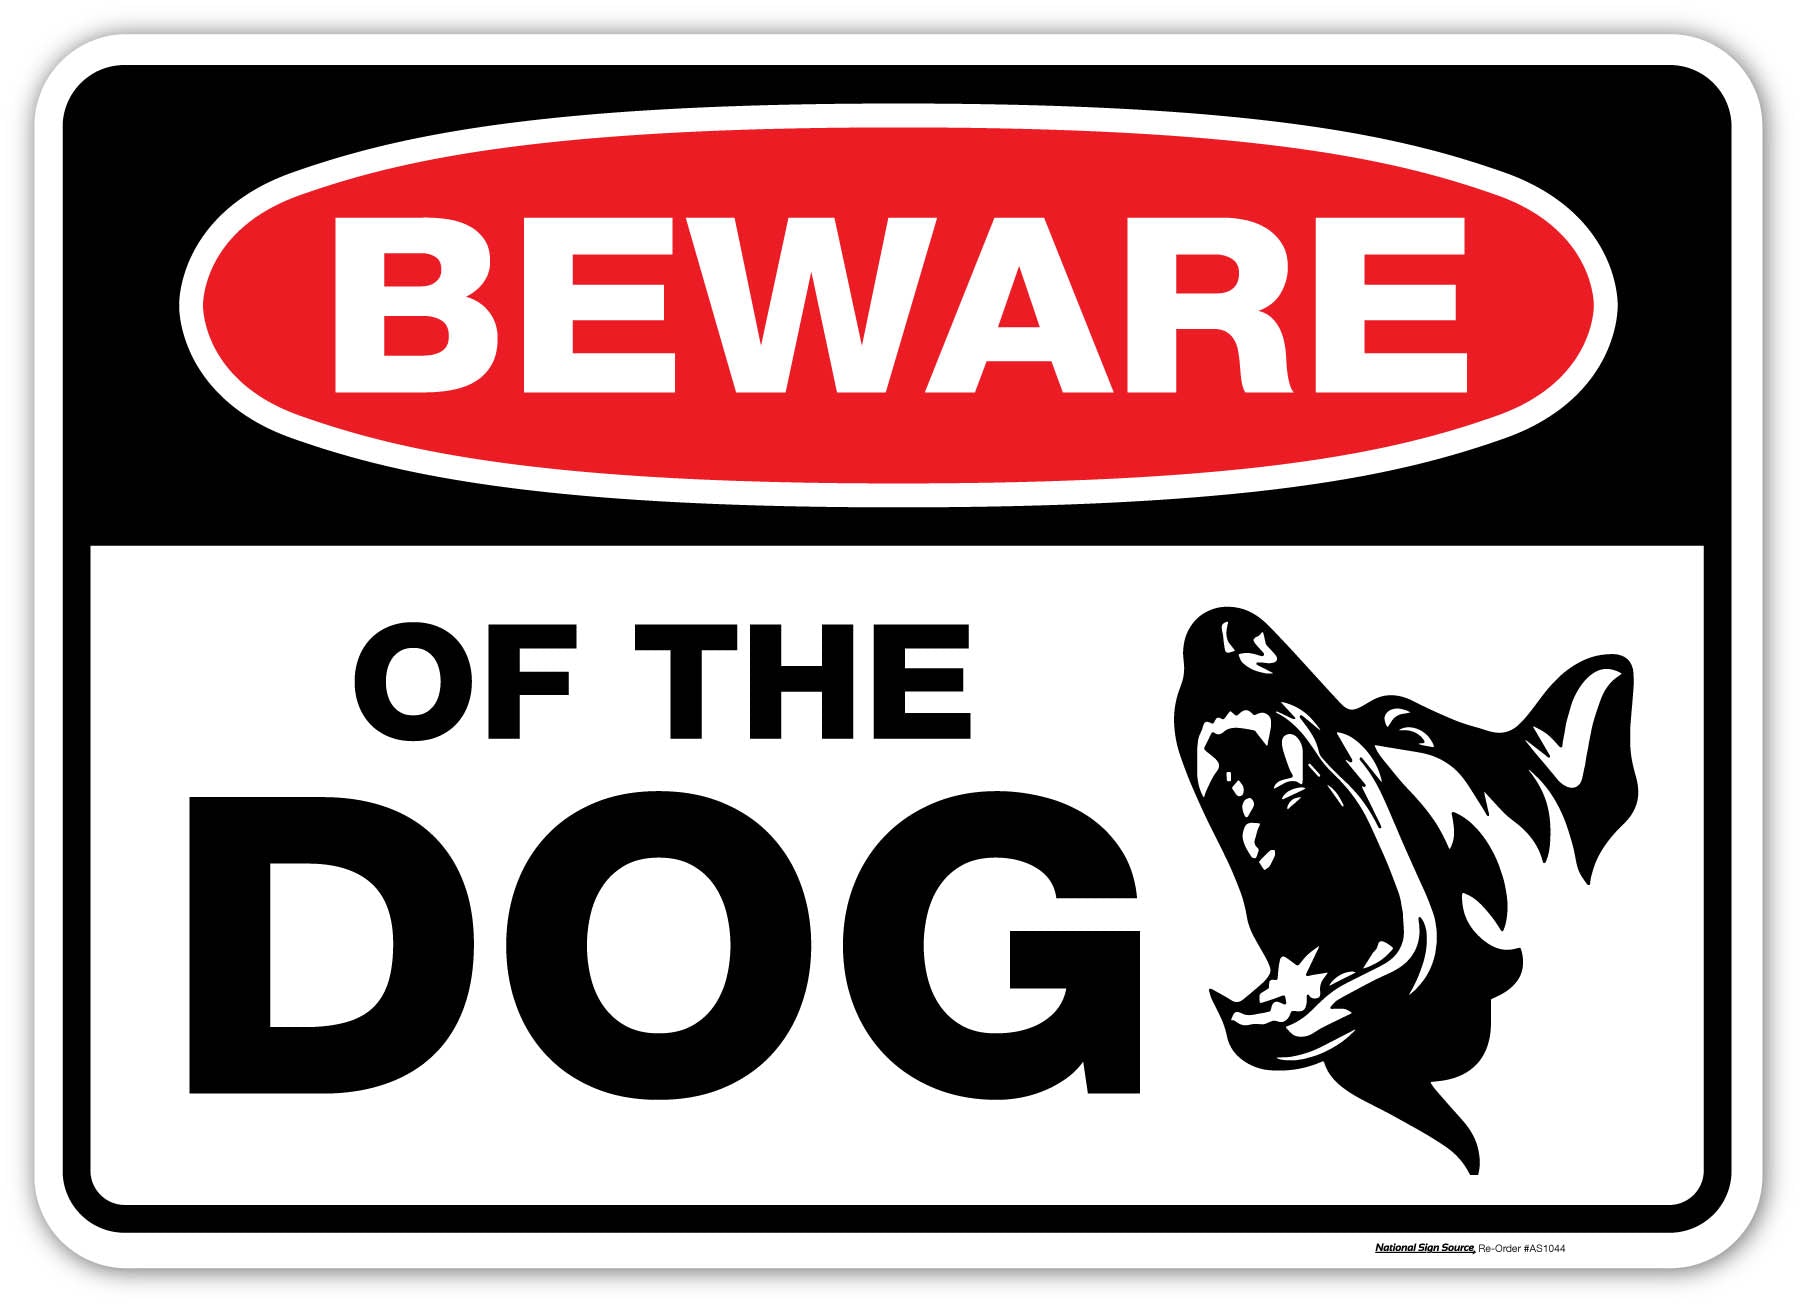 Aluminum and peel and stick vinyl signs that reads, "BEWARE OF THE DOG."  A fierce barking dog image is displayed on the signs.